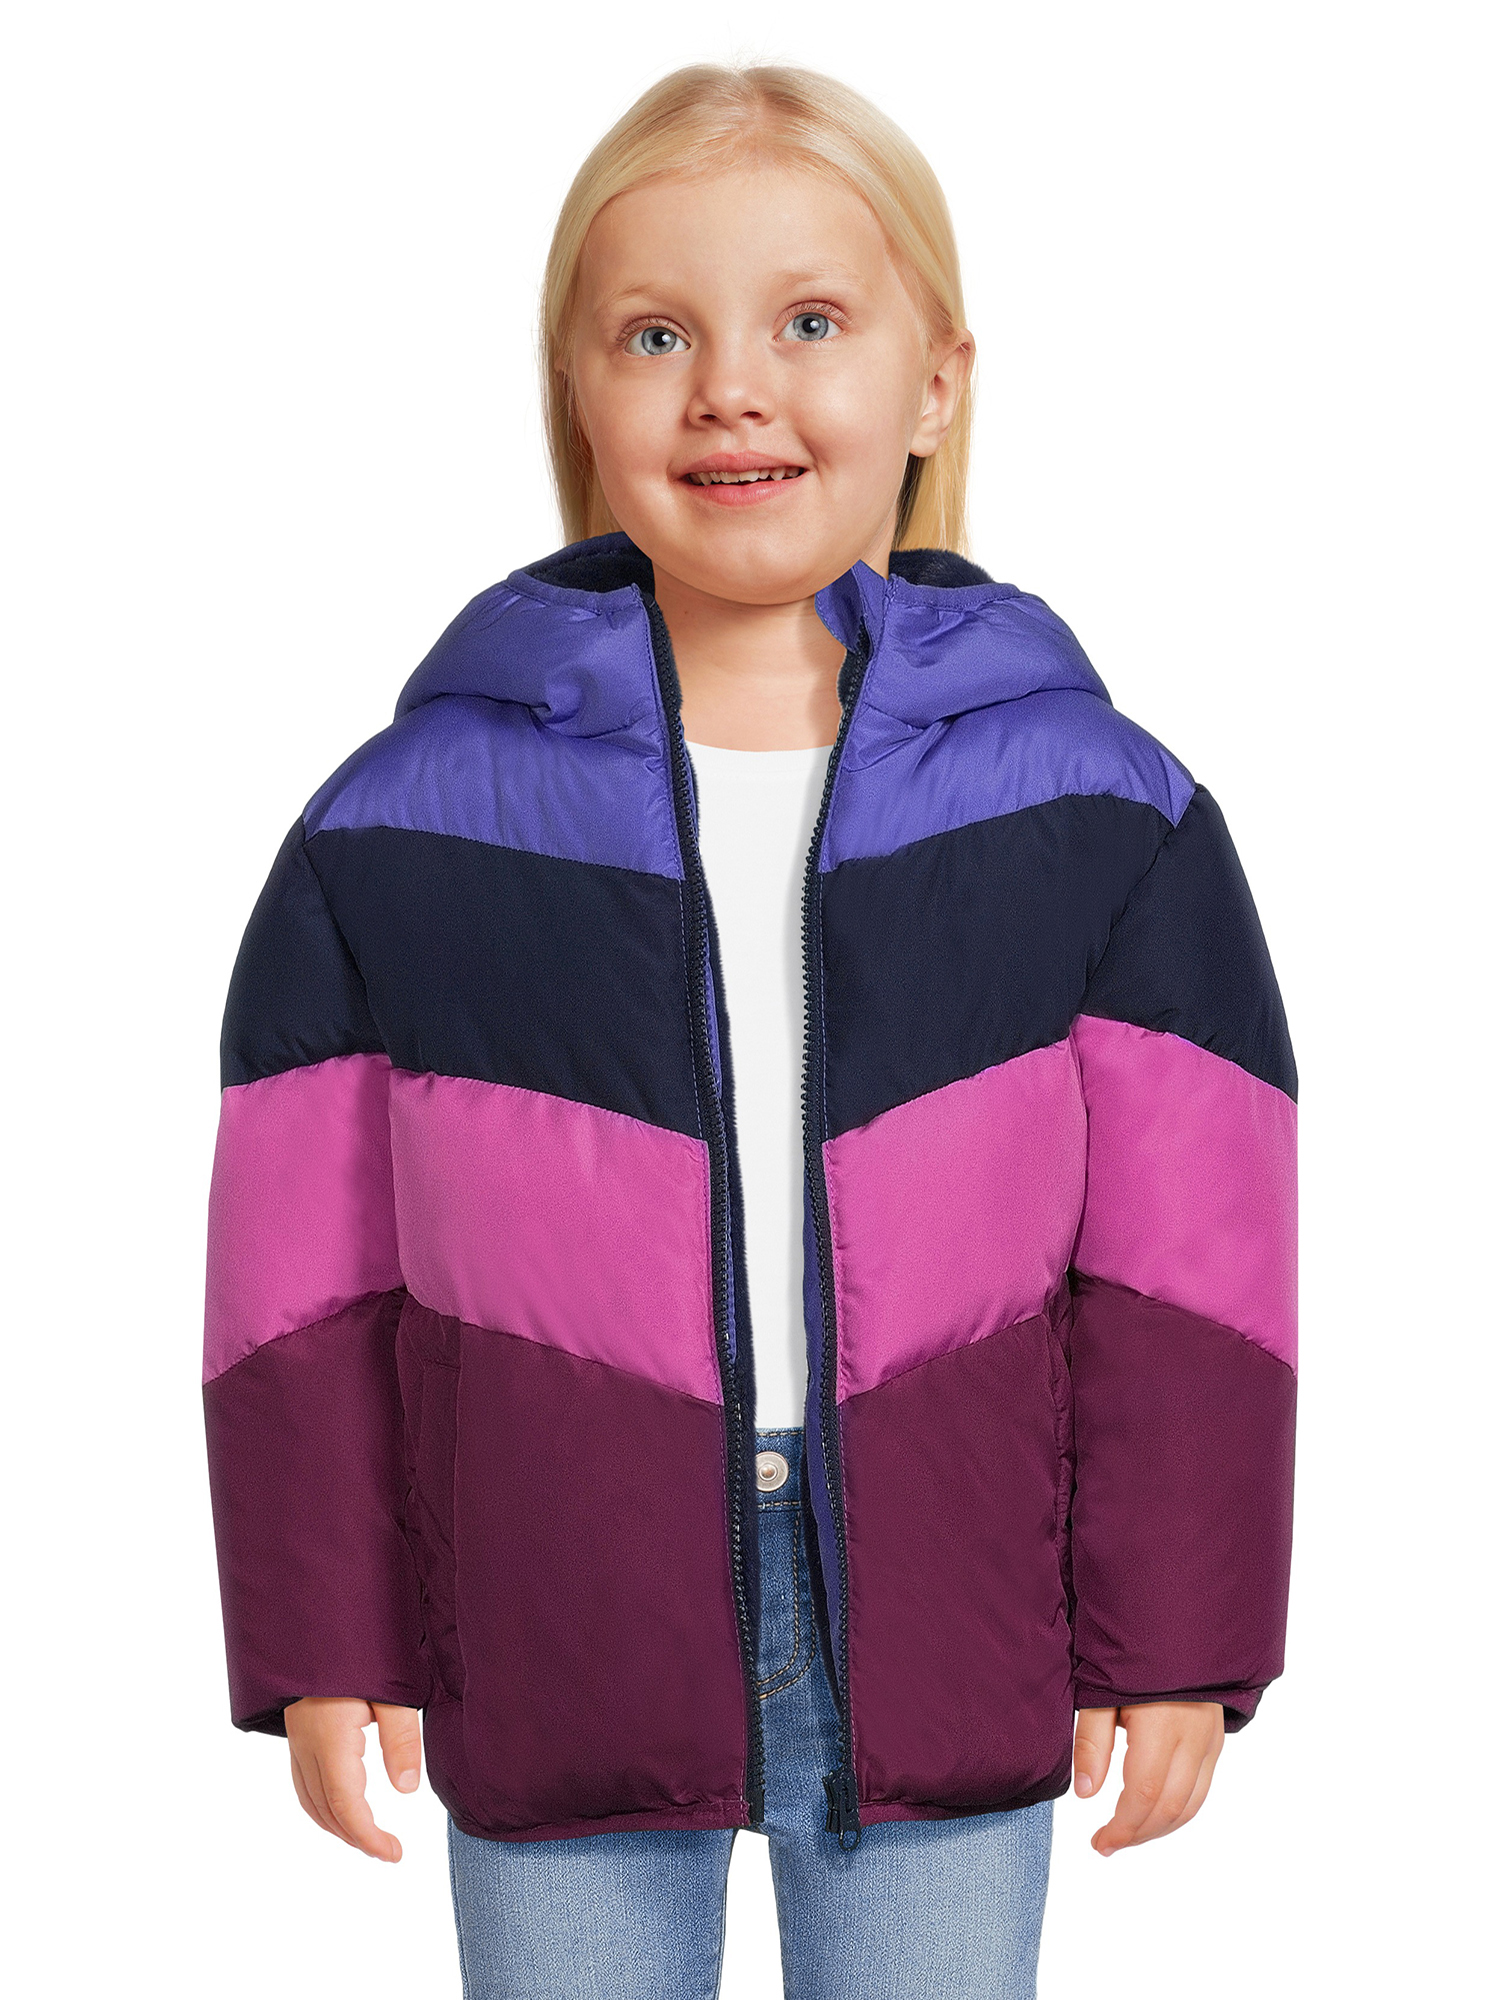 Swiss Tech Baby and Toddler Girls Puffer Jacket with Hood, Sizes 12M-5T - image 1 of 6